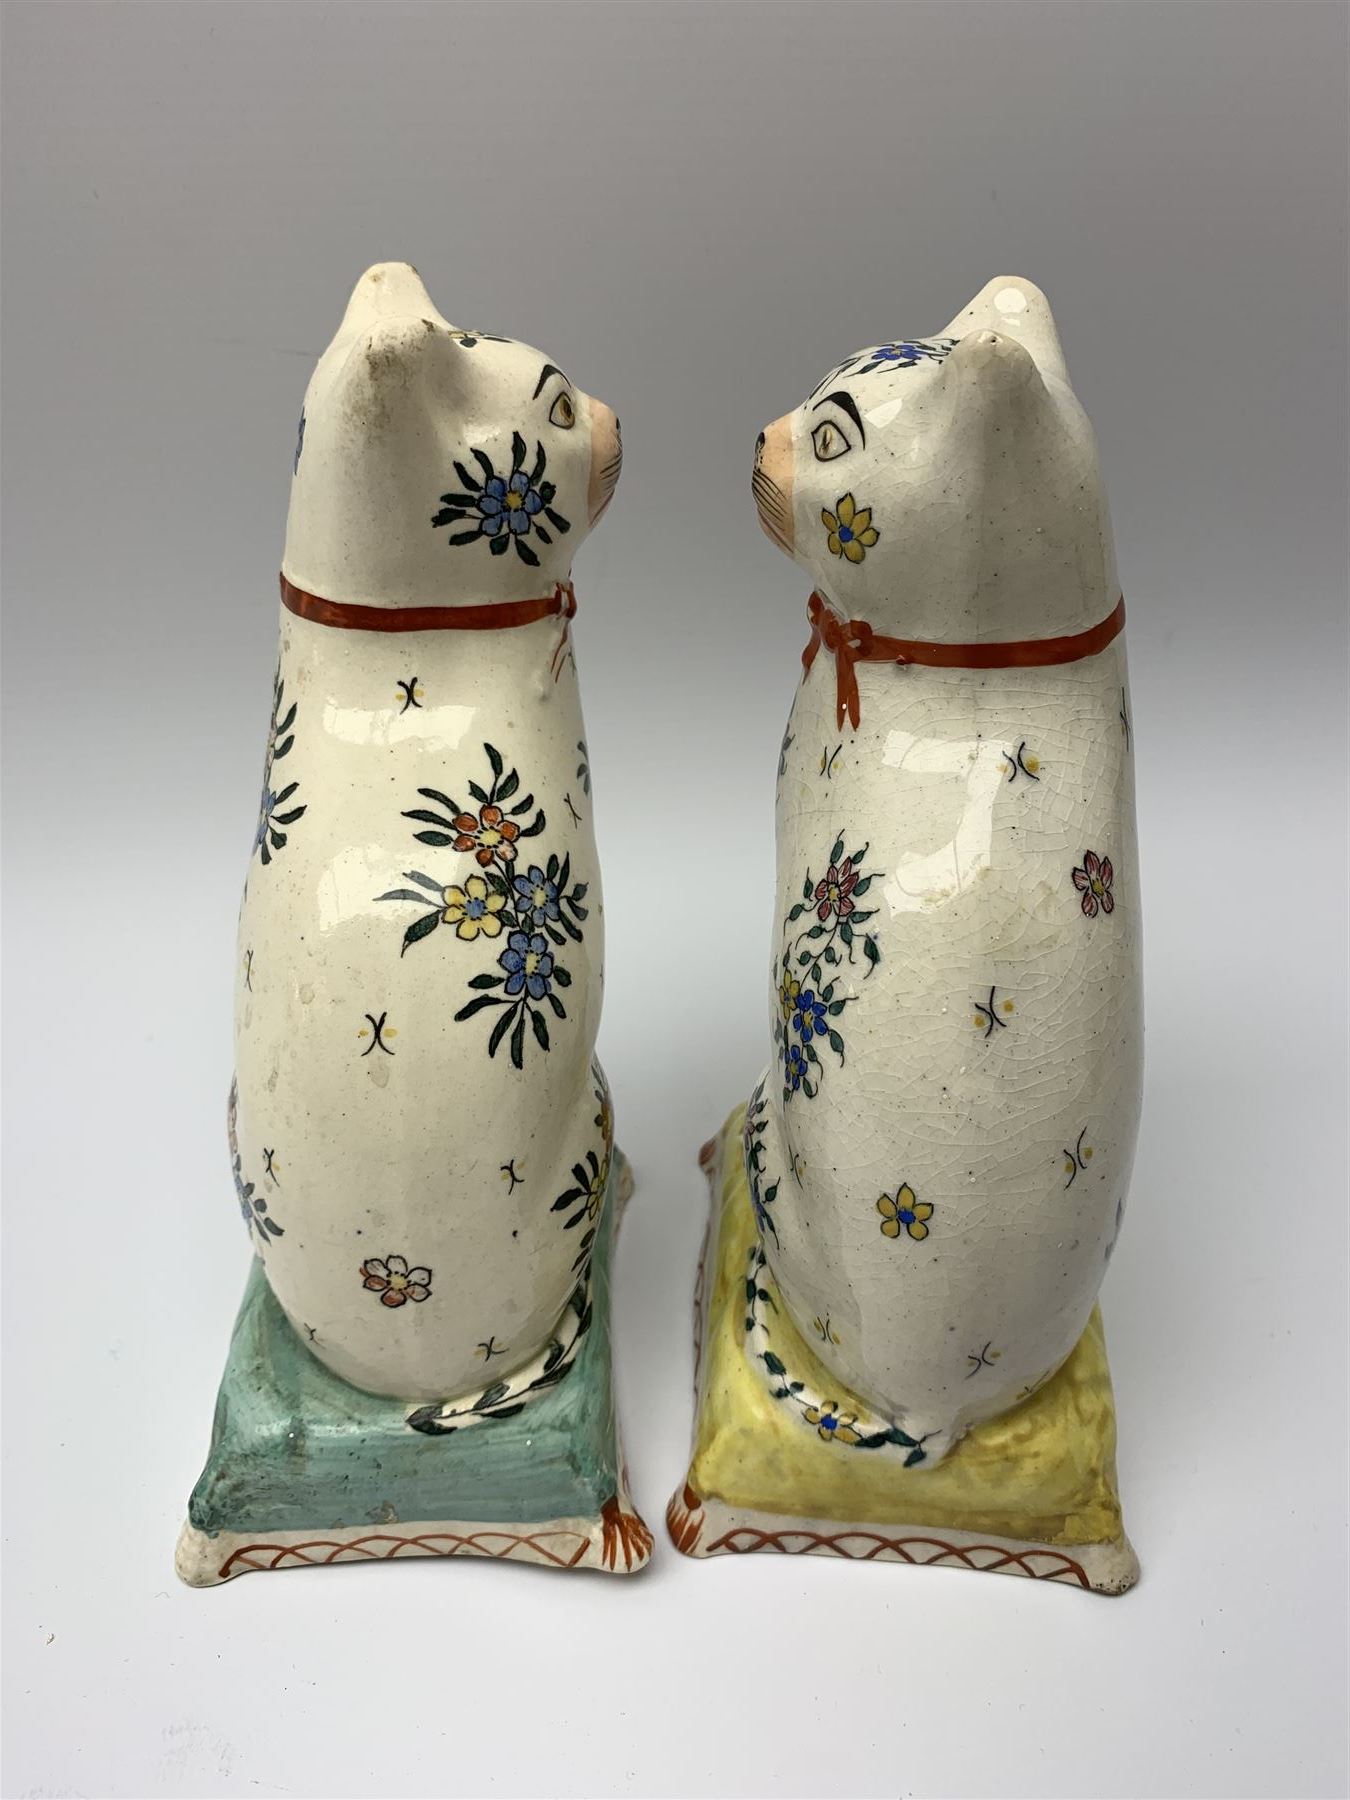 Pair of 19th century Staffordshire cats - Image 3 of 6